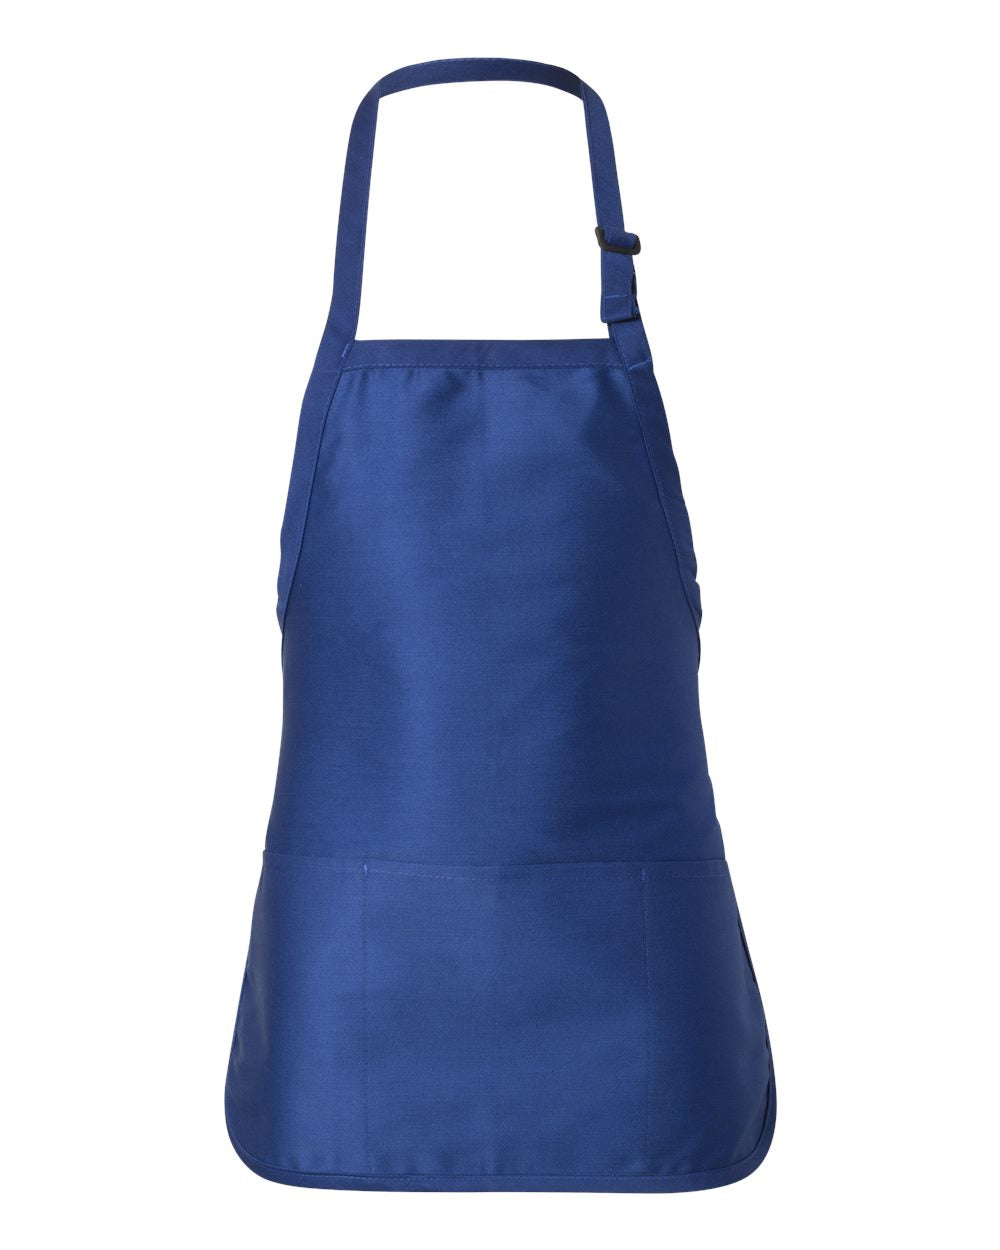 CUSTOM APRON (TELL ME DESIGN AT CHECKOUT TO USE)